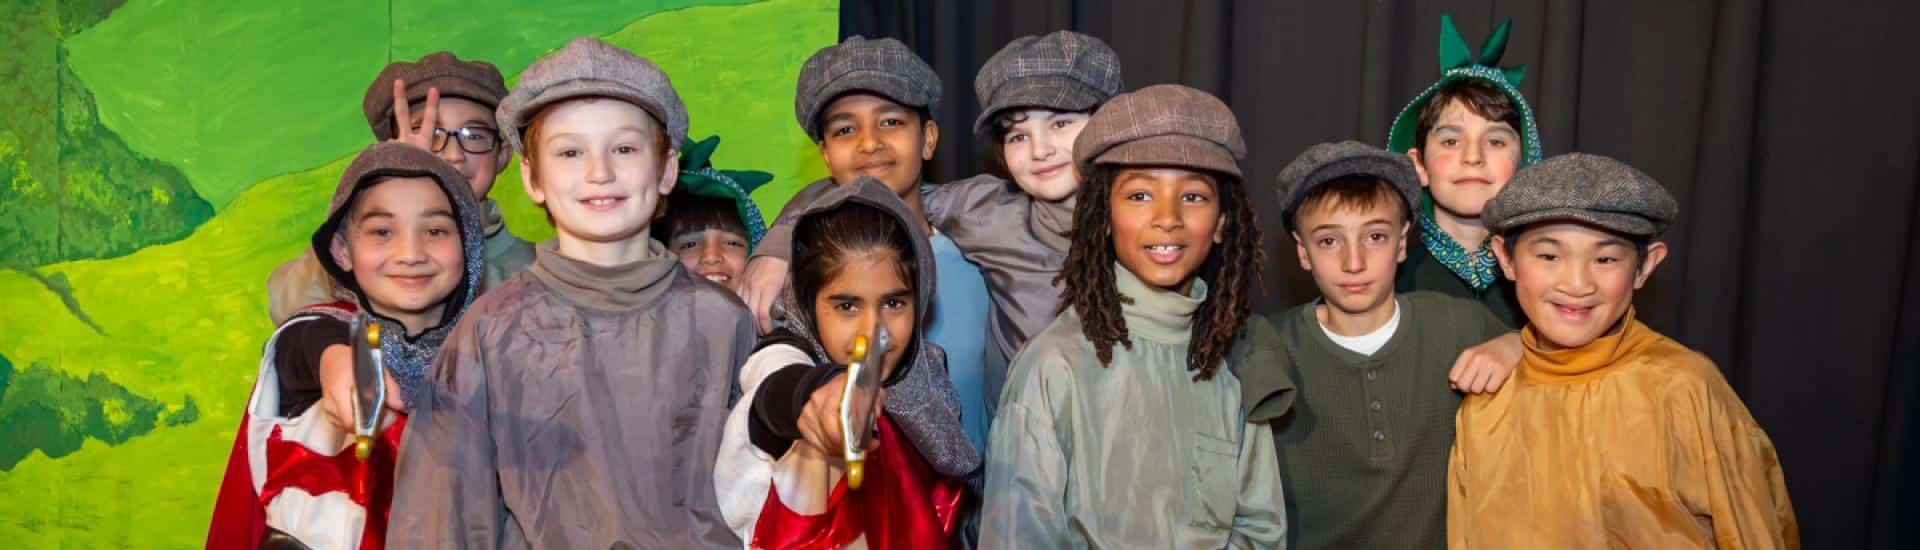 A group of boys in costume on stage during their class play